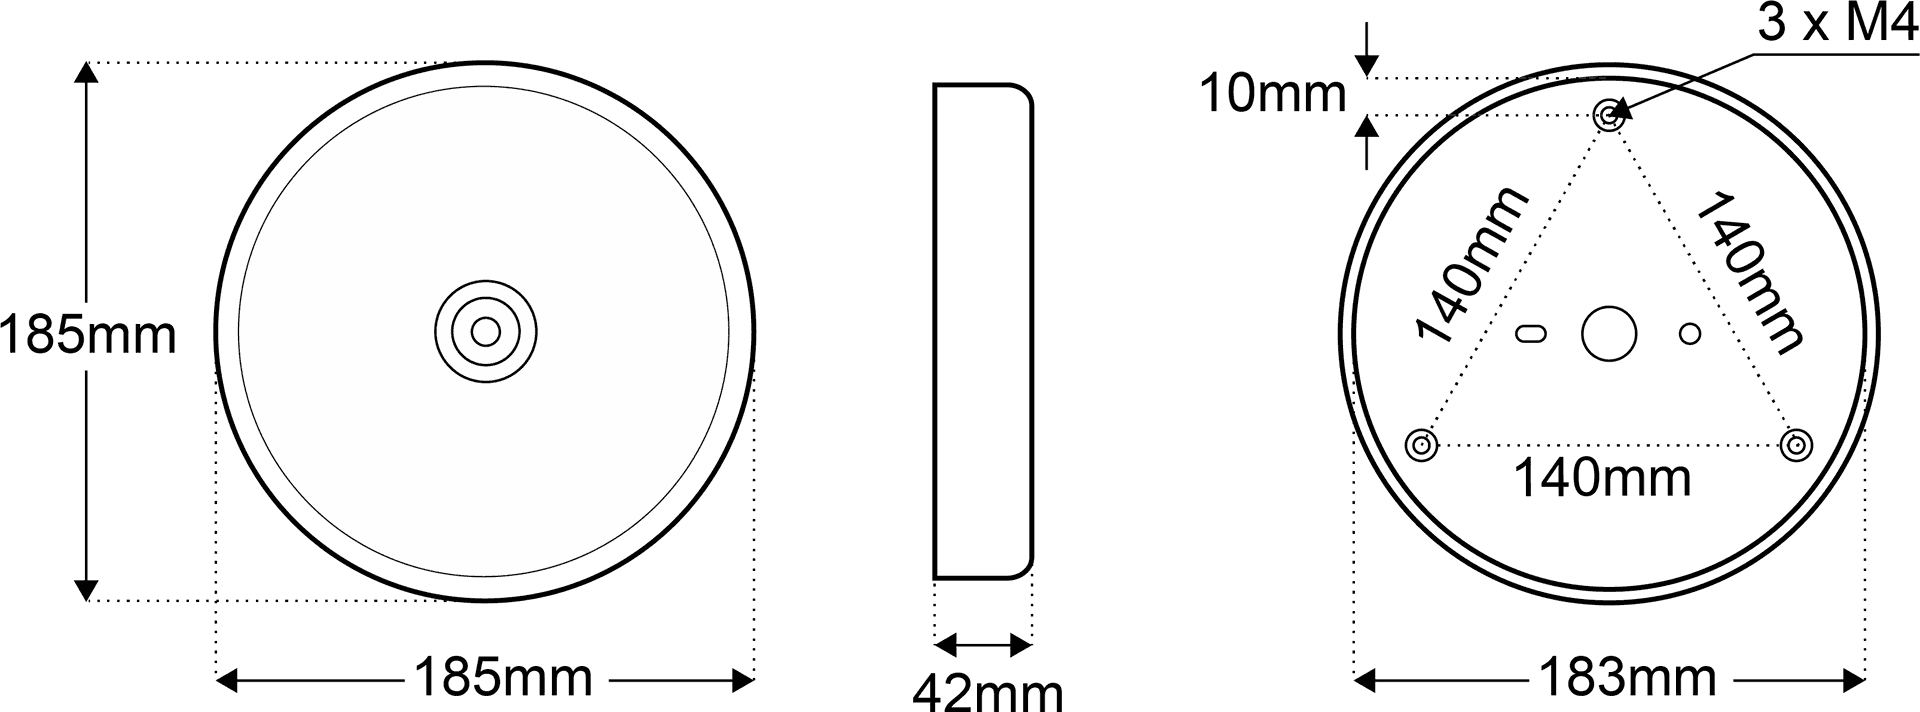 Technical Drawing Rounded Rectangle Object PNG